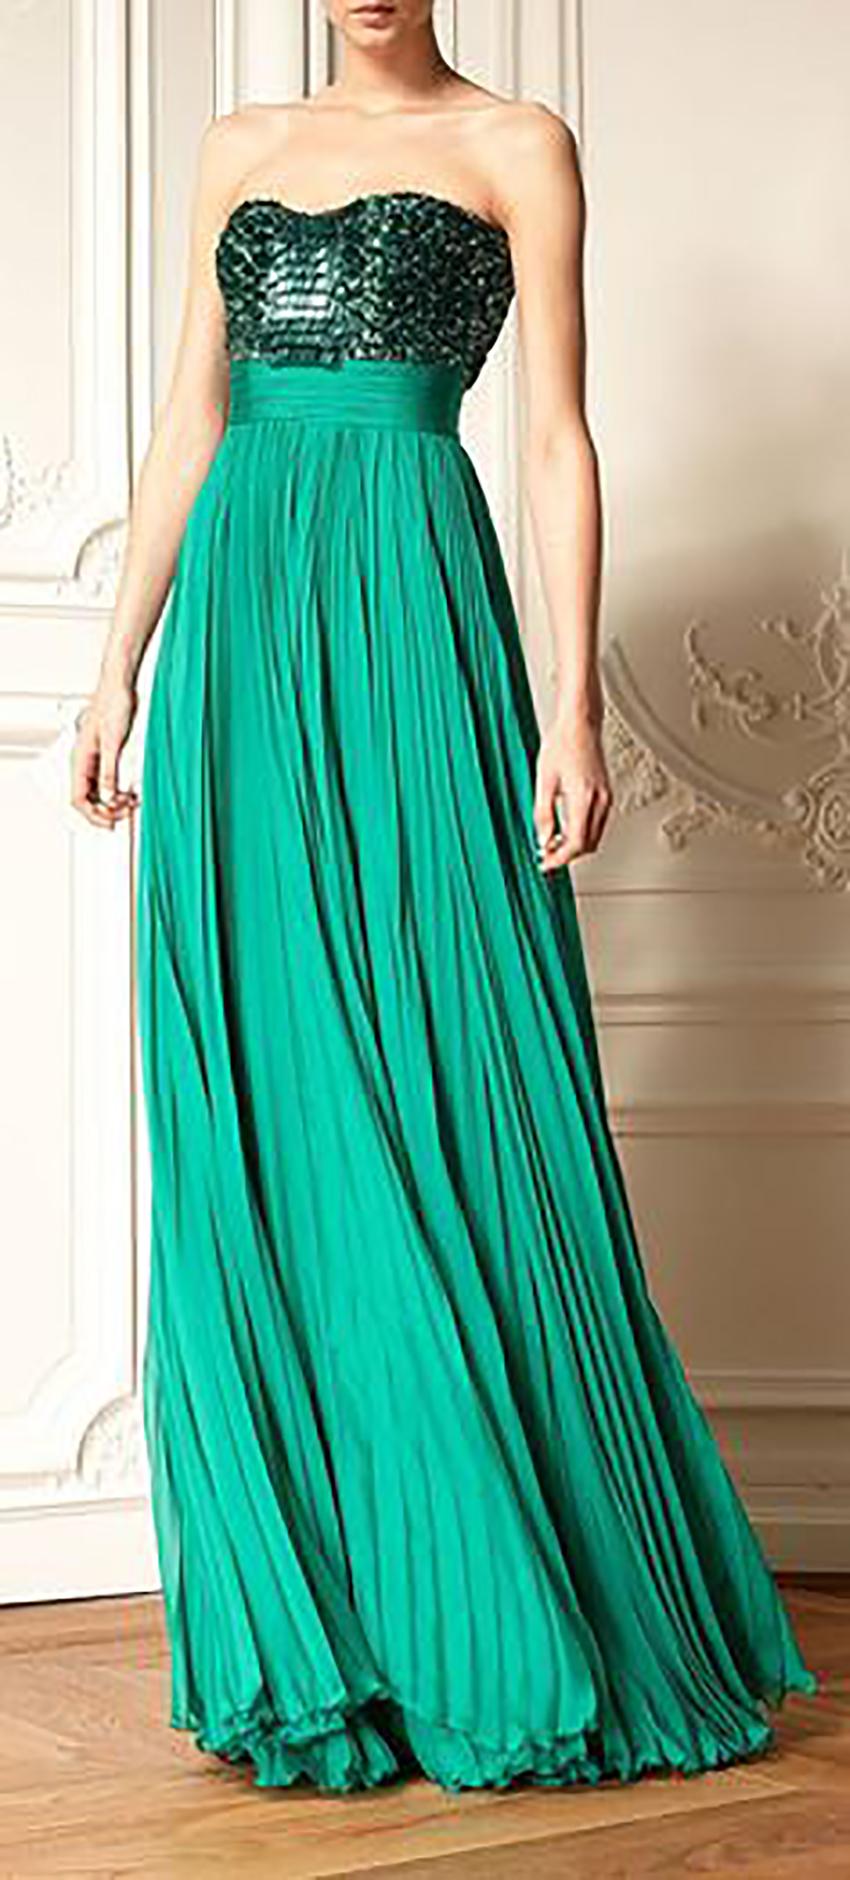 ZUHAIR MURAD

Resort 2013 L#34 
EMERALD SILK GOWN with SEQUIN EMBELLISHED CORSET
Zuhair Murad. Exactly what are unique concerning Zuhair’s collection are usually originality, versatility and womanliness. 

Content: 50% silk. 50% polyamide

Made in